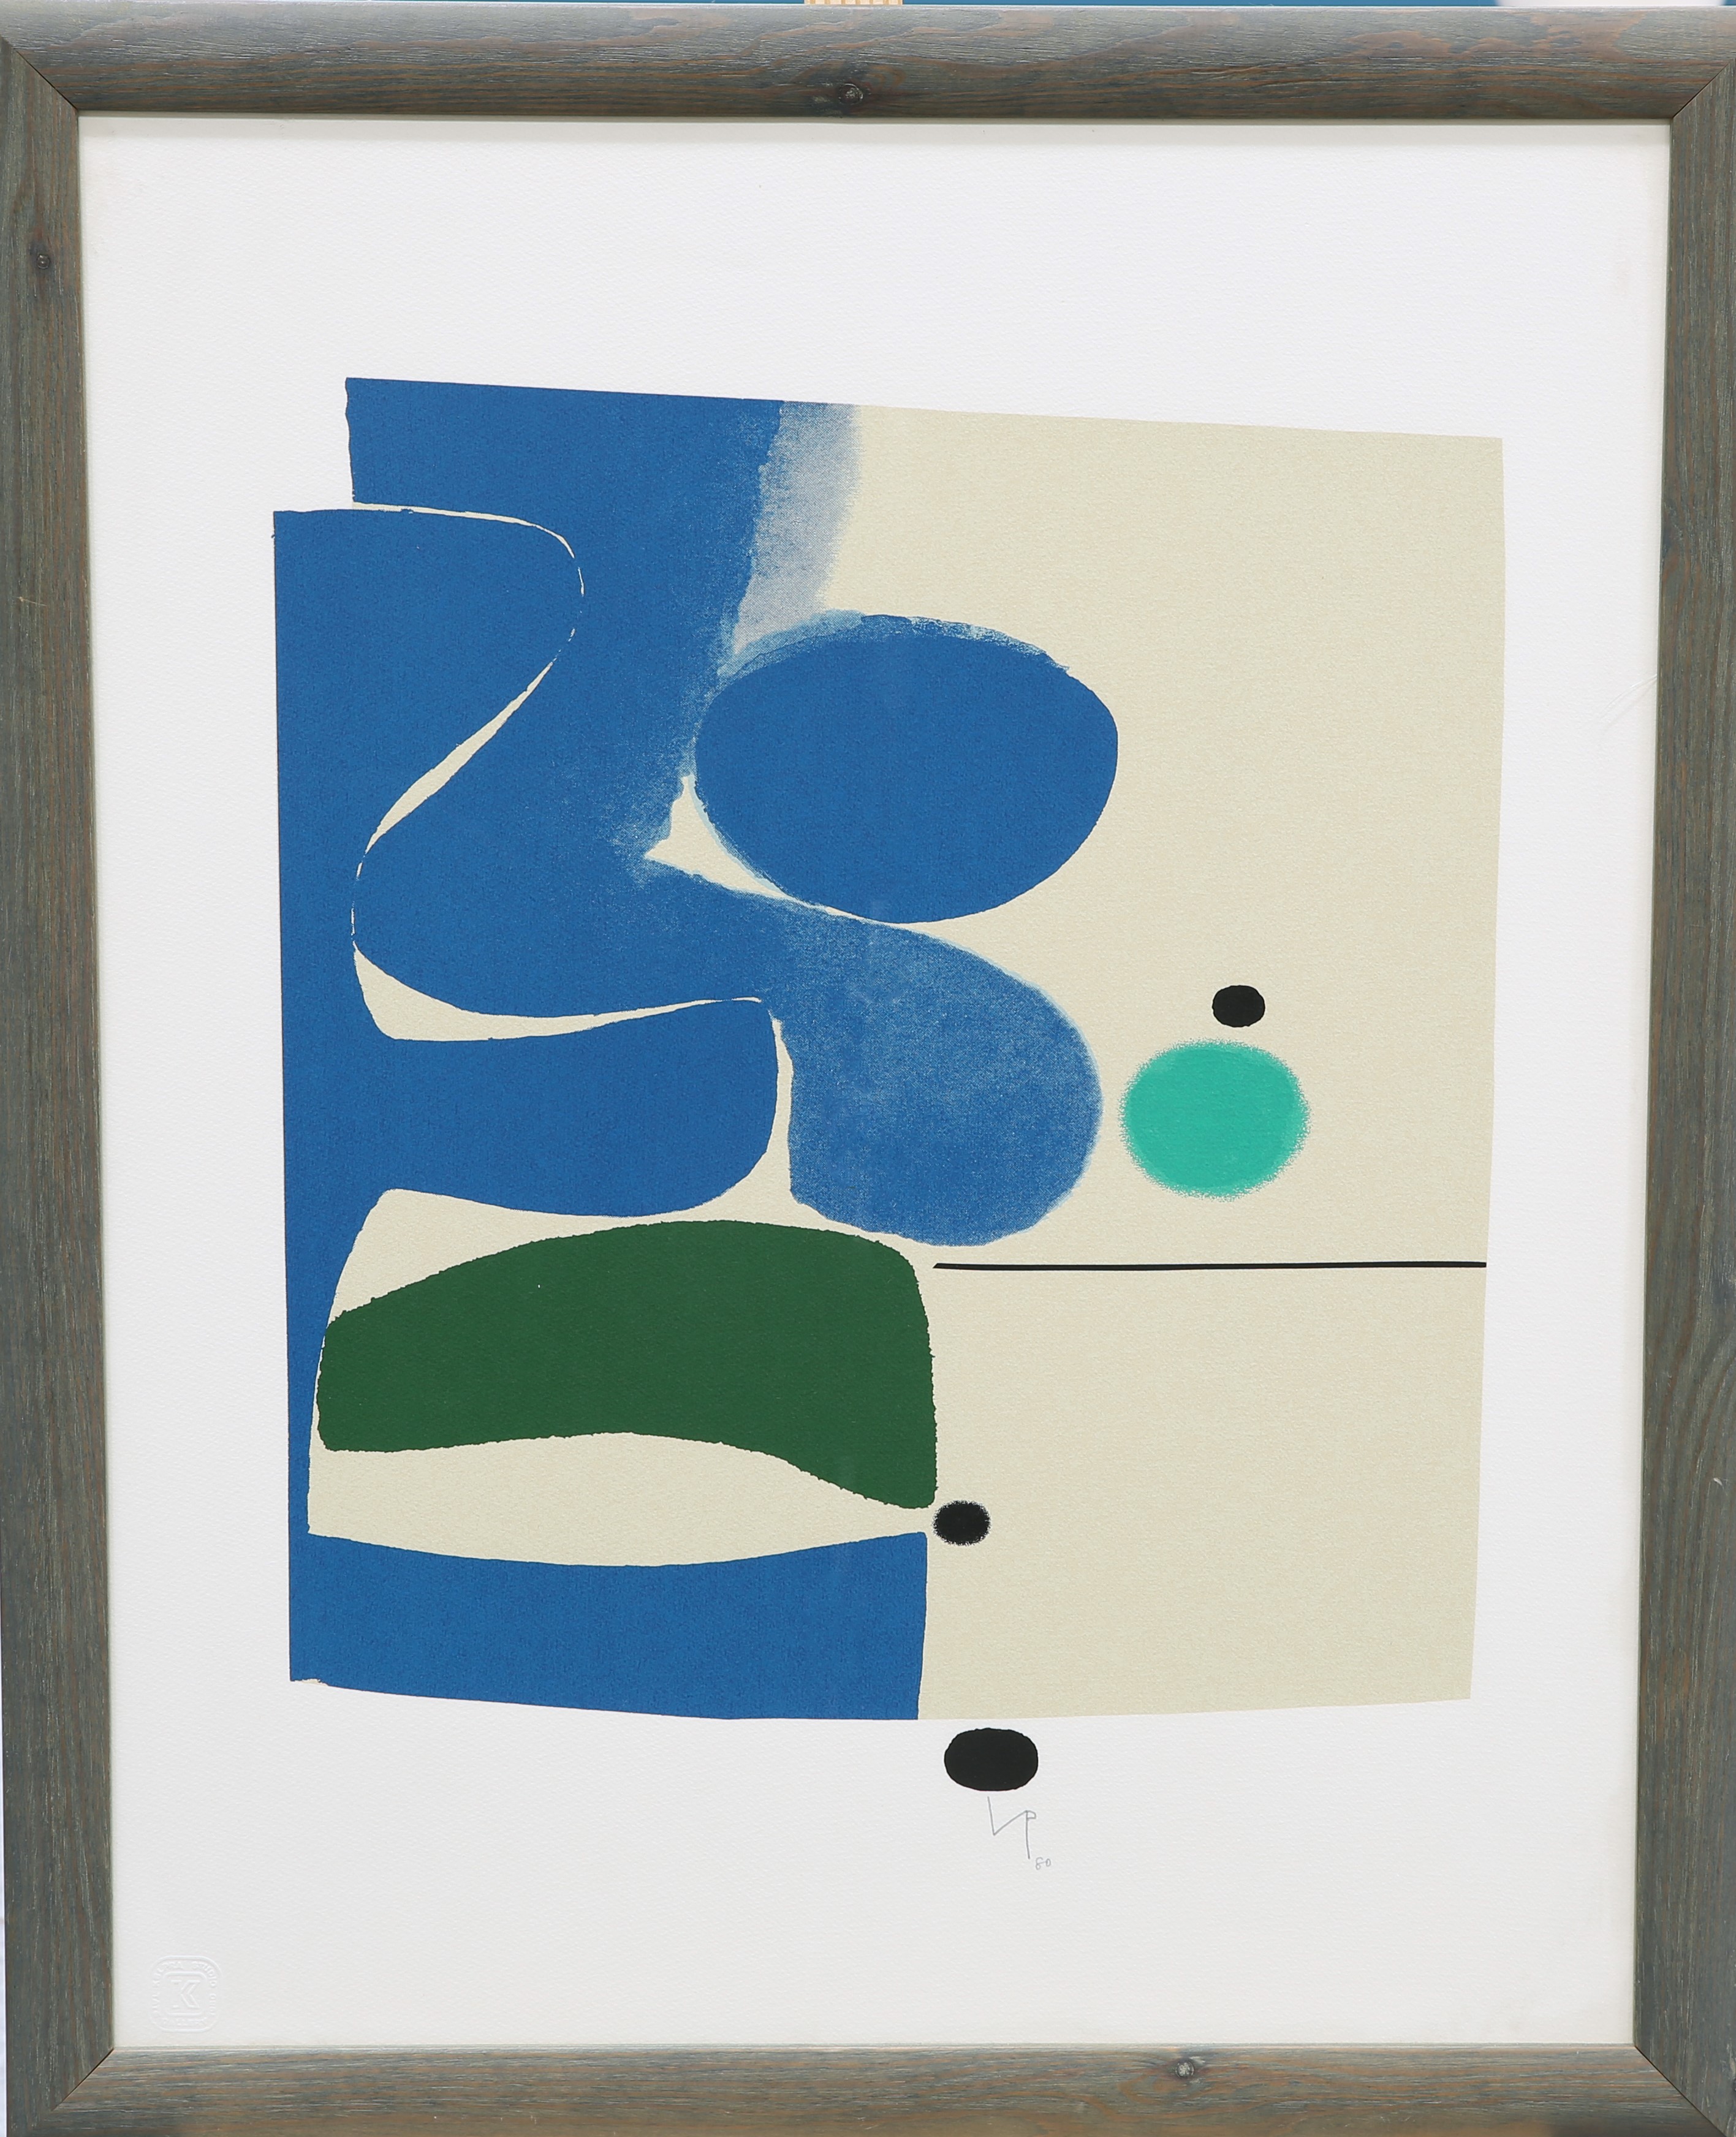 VICTOR PASMORE (BRITISH, 1908-1998), BLUE MOVEMENT AND GREEN